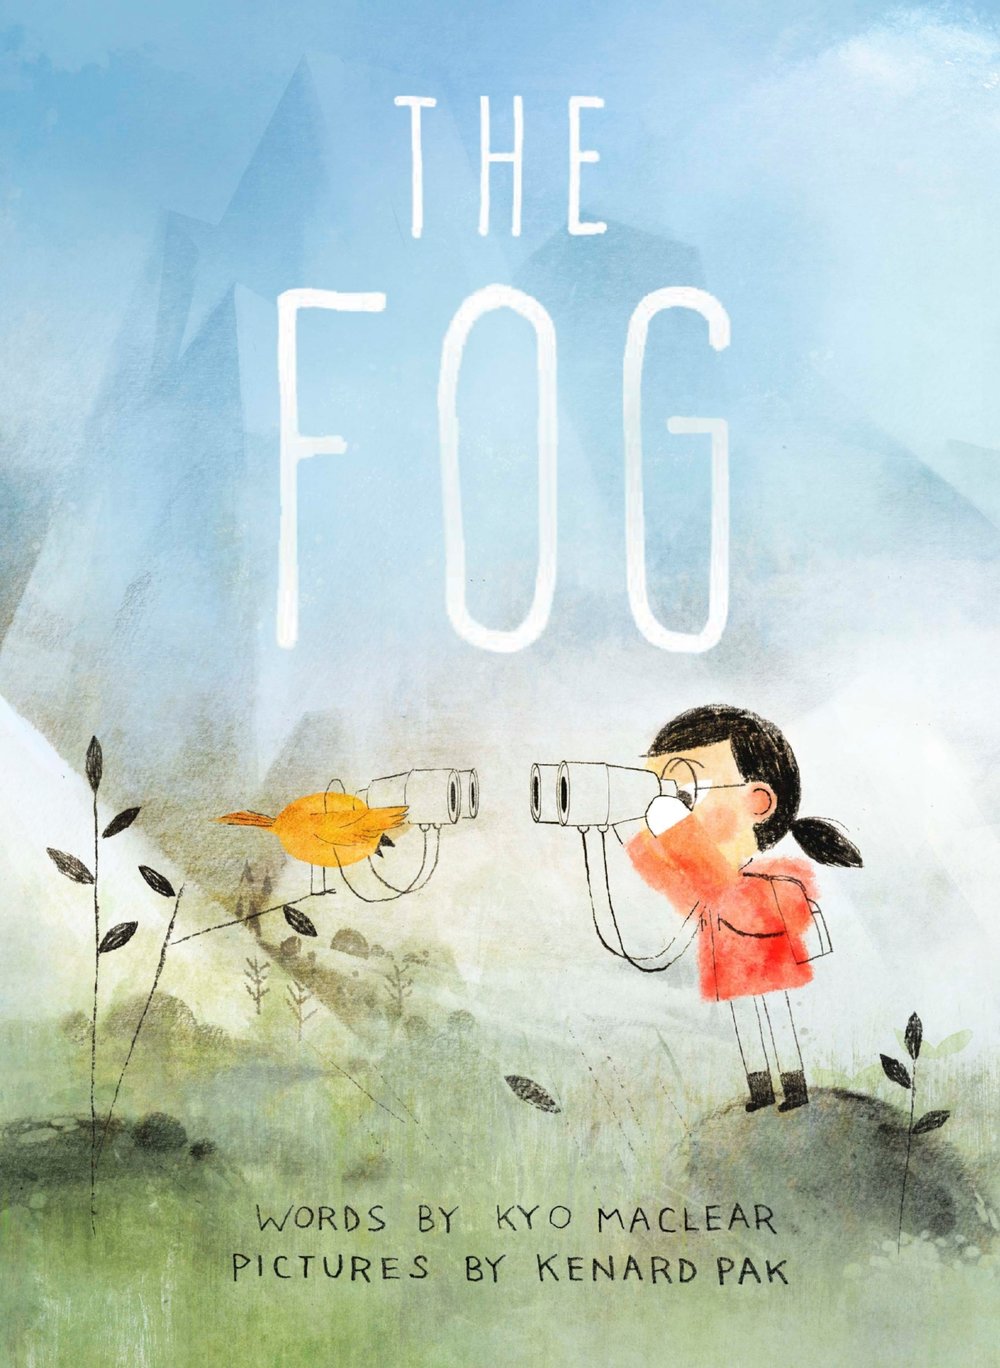 Cover of the book The Fog. Features a young child and a bird, each staring at the other through a pair of binoculars, on a foggy background. The title is printed in large, white text.